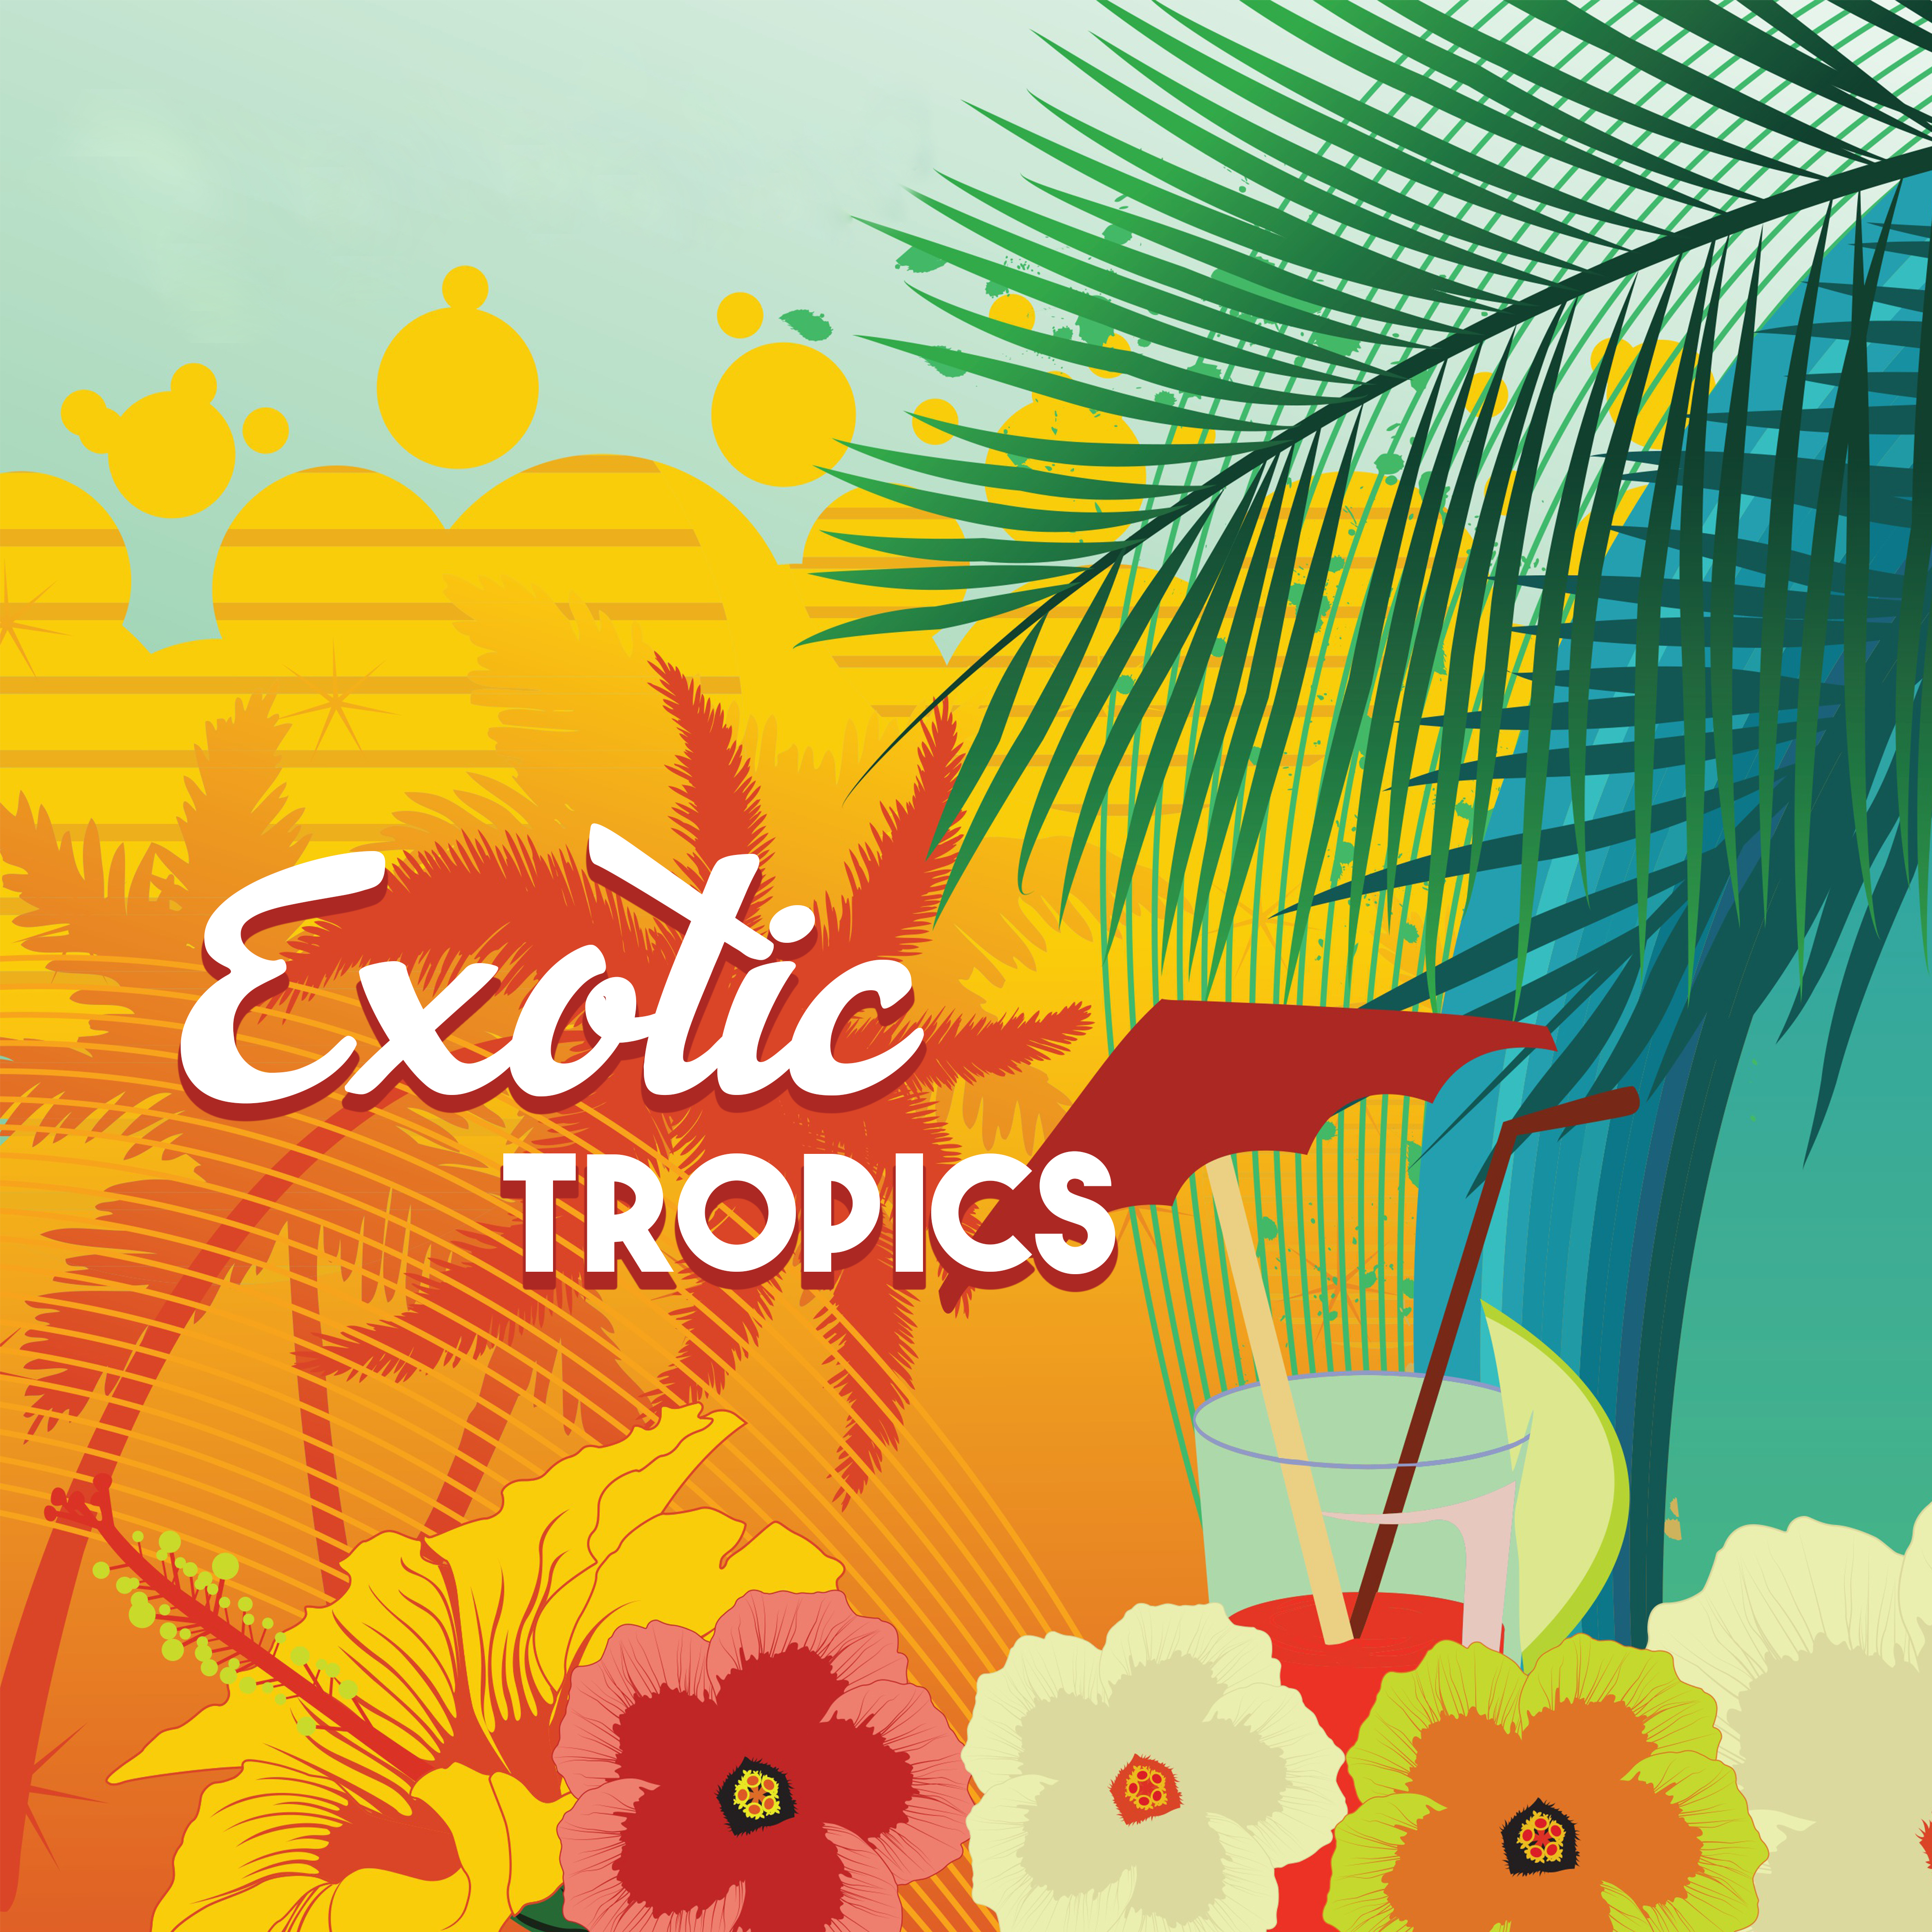 Exotic Tropics  Beach Music, Ibiza Lounge, Relax Under Palms, Sounds of Sea, Beach Party, Drink Bar, Hot Riviera, Holiday Chill Out Music